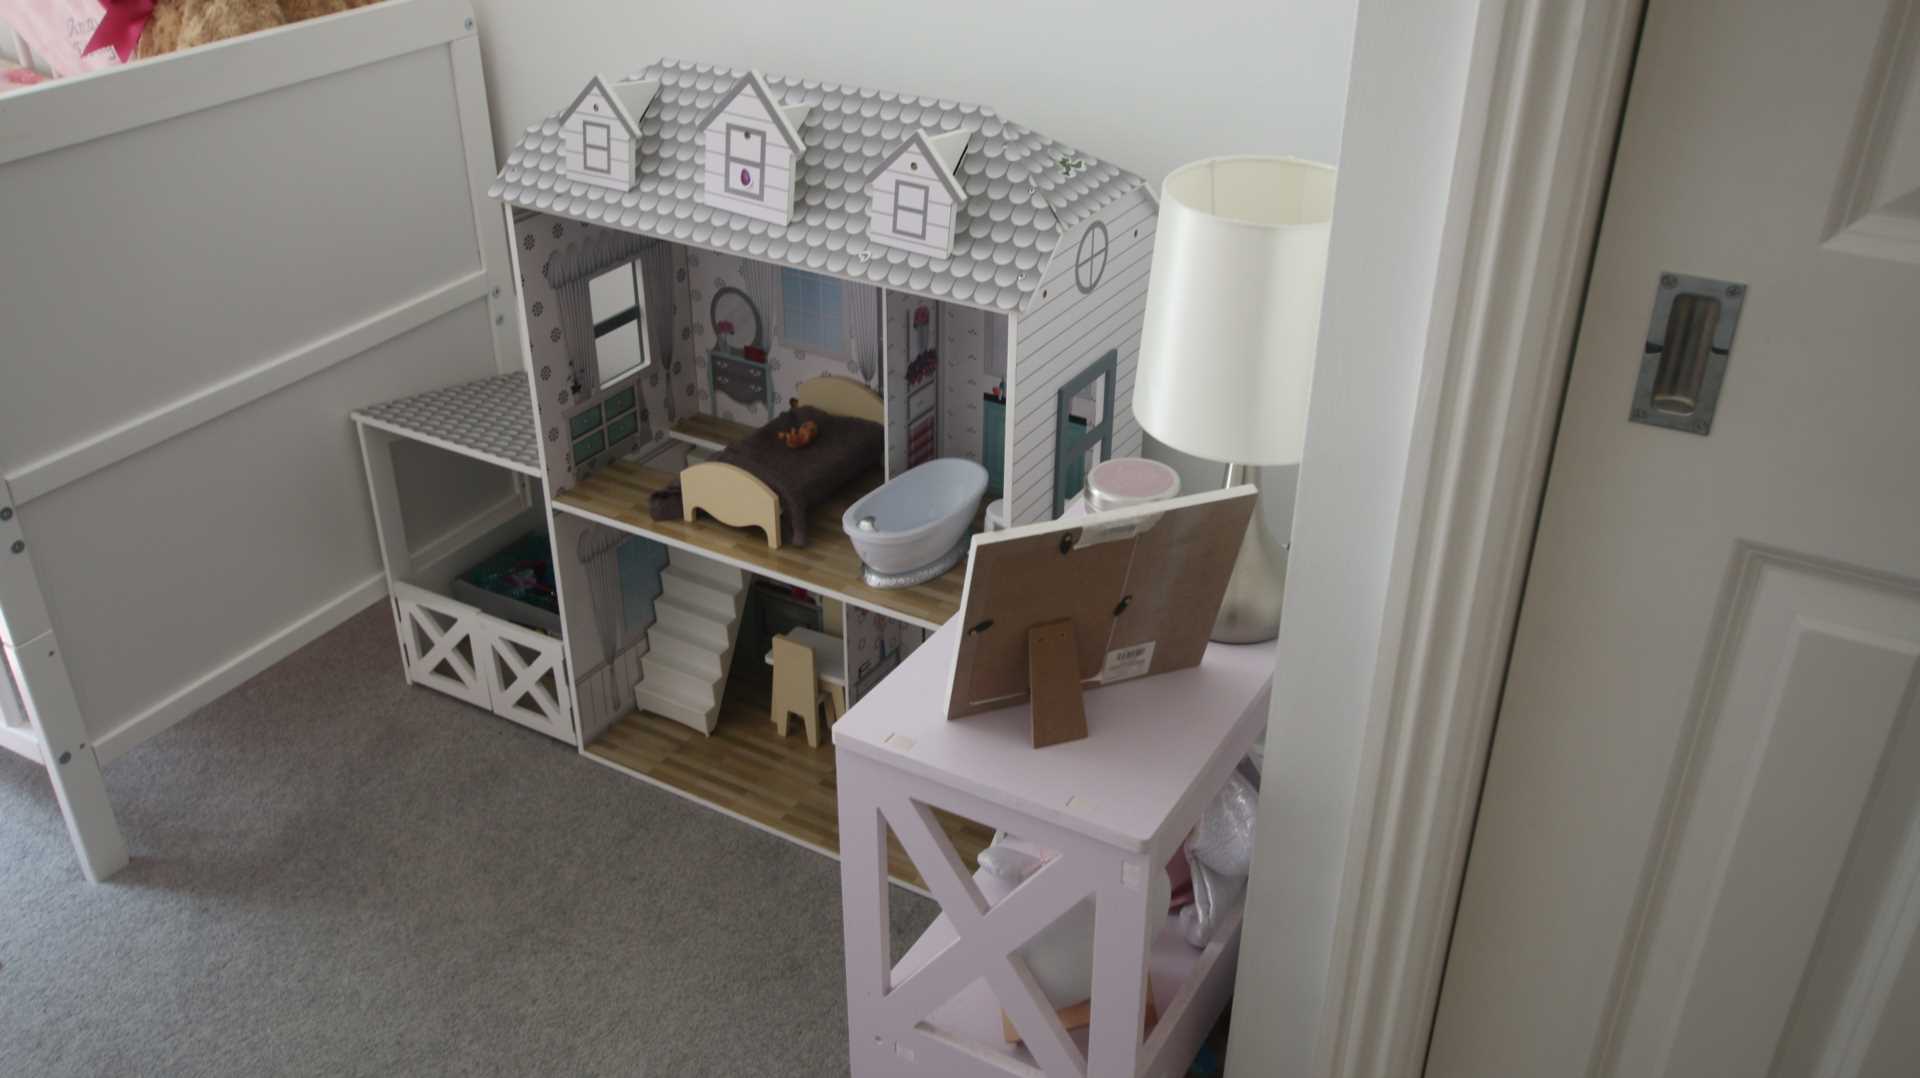 2 bedroom apartment First Time Buyers delight, Light Bright and Airy ample storage plus parking pets welcome, Image 10